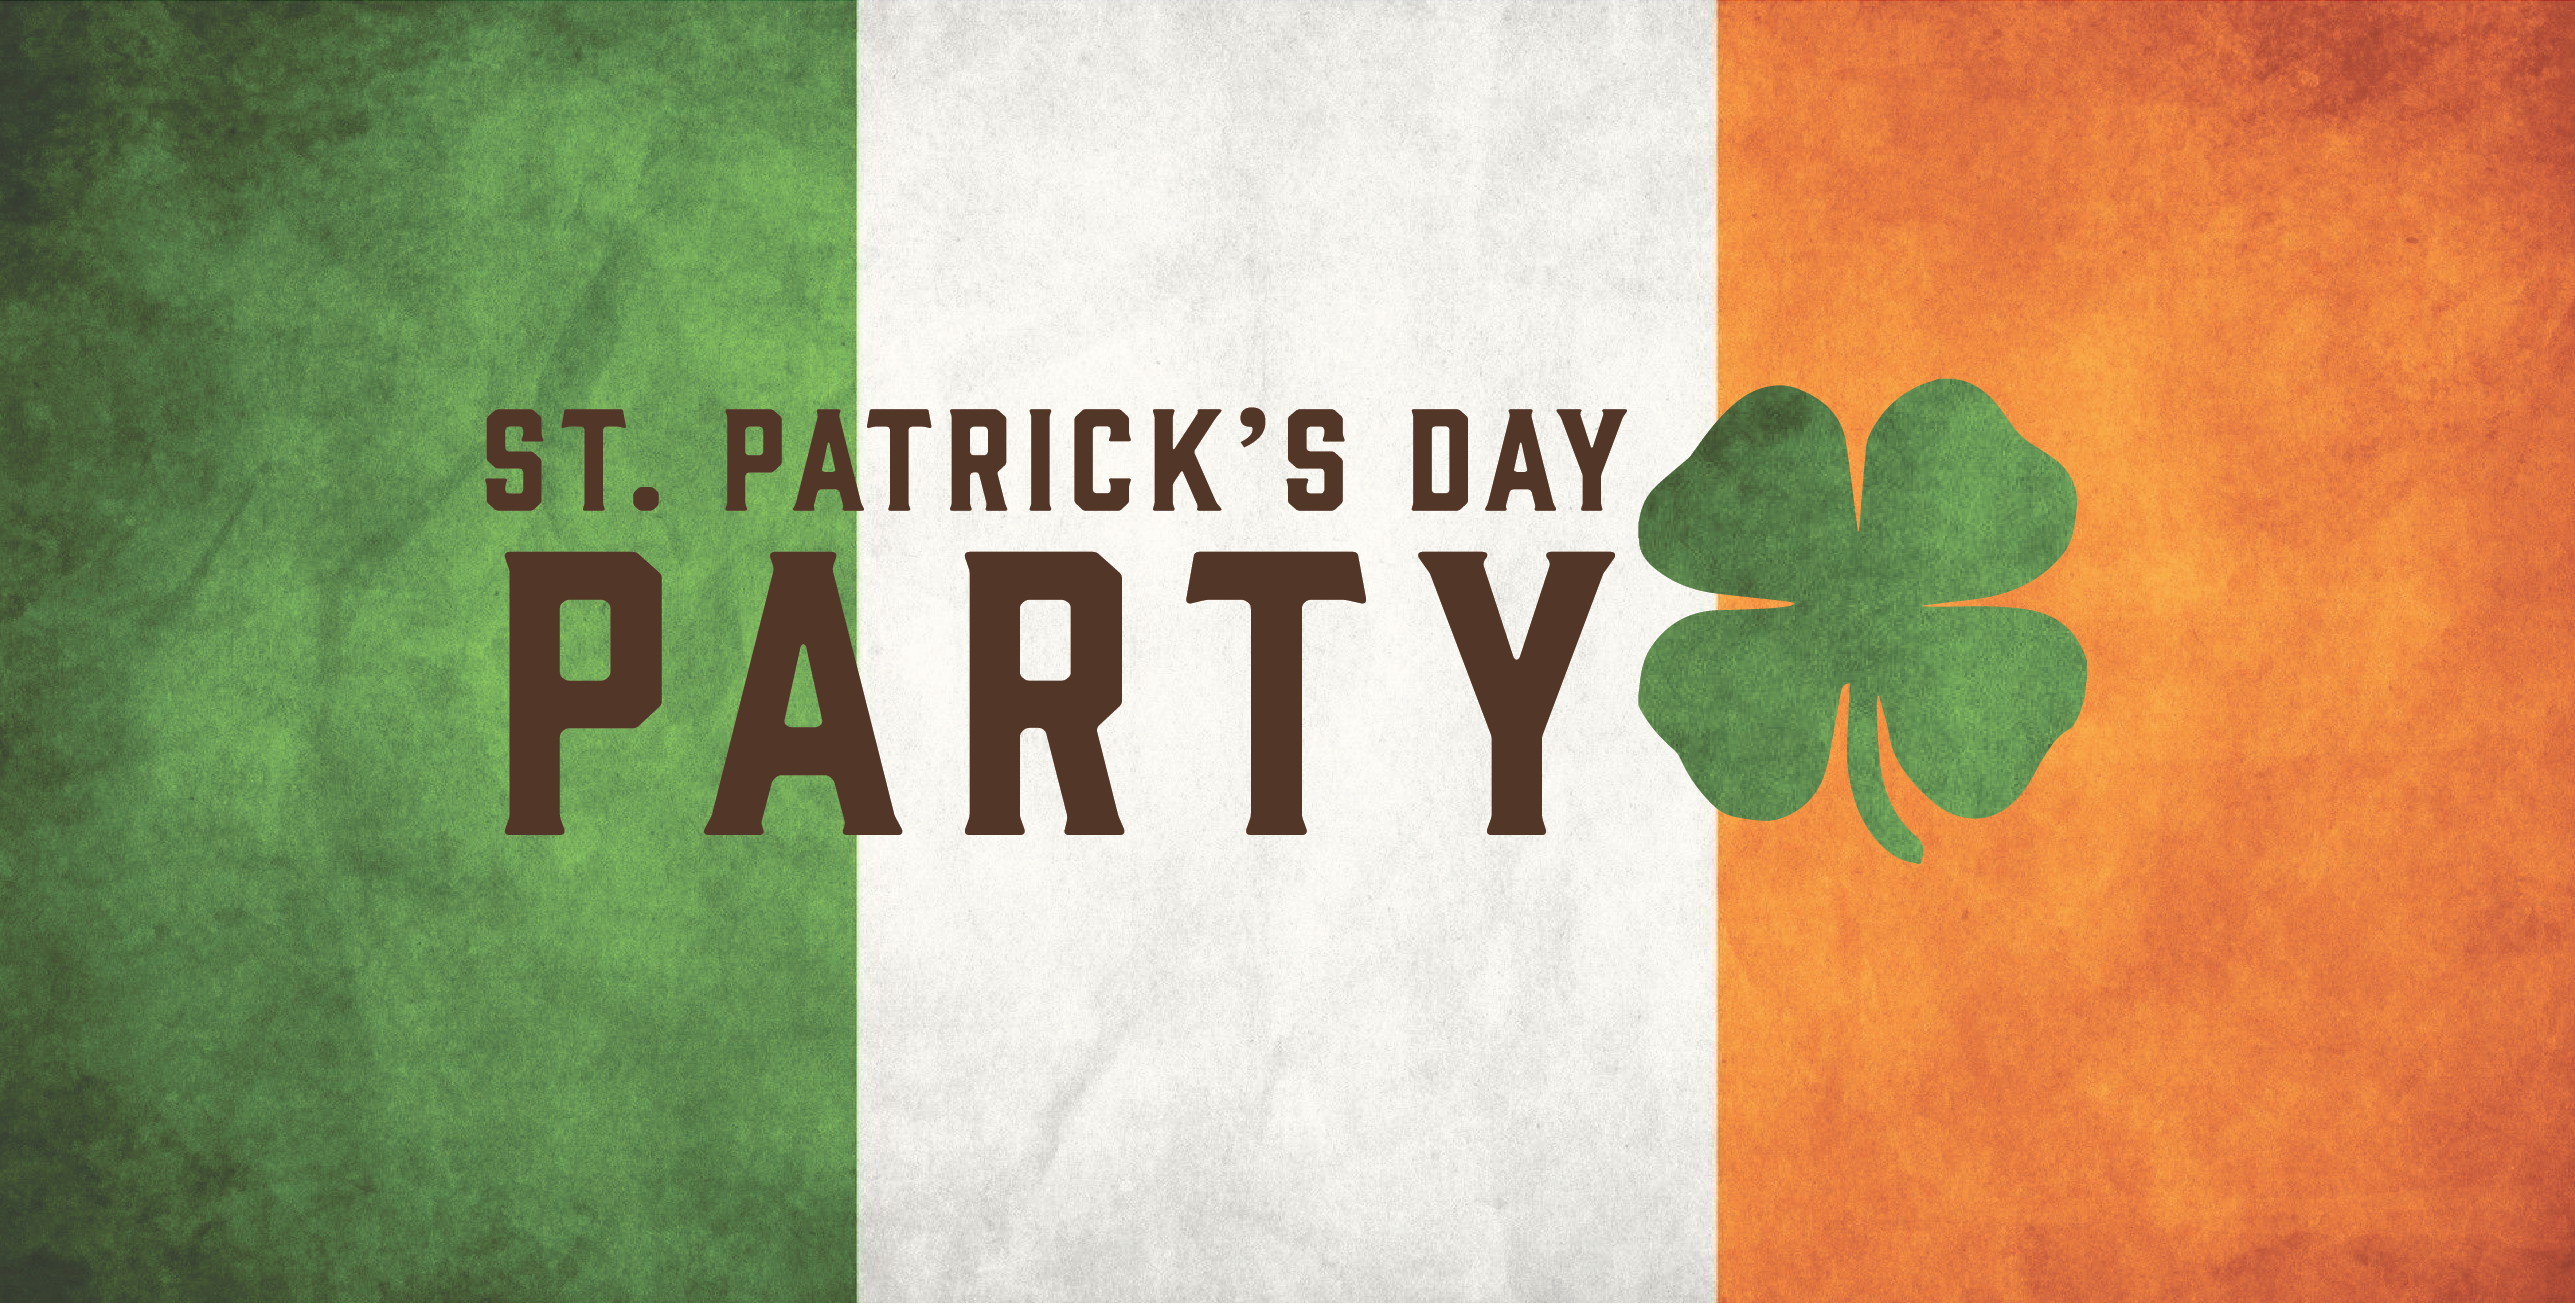 How To Plan A St. Patrick’s Day Party For Preschoolers